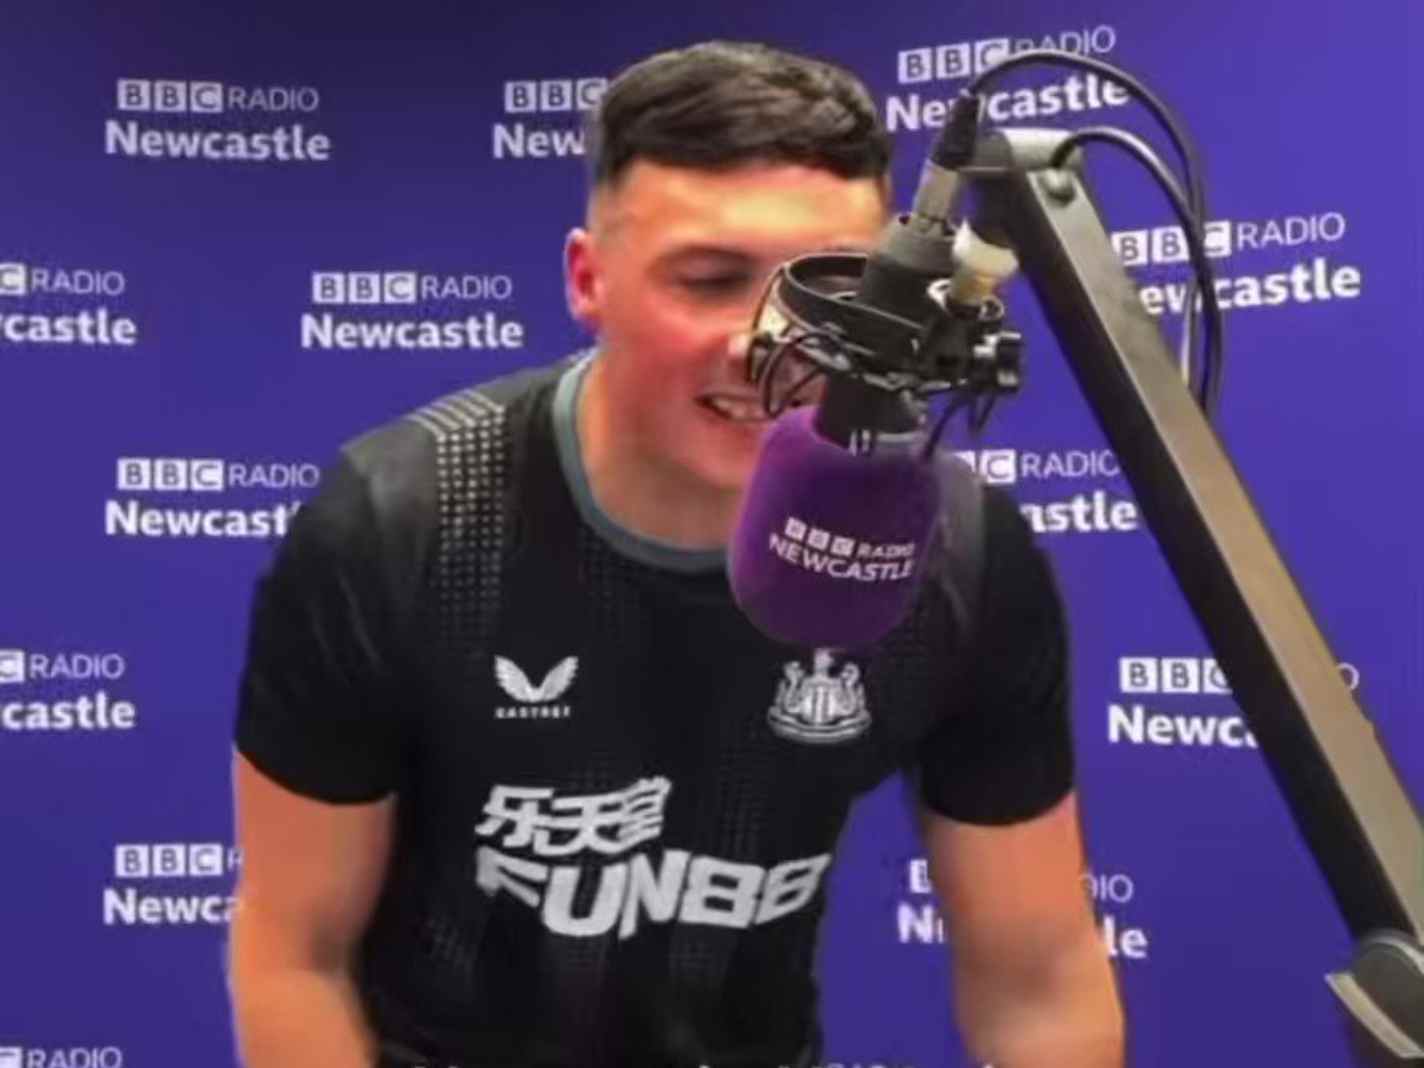 MC Tazo and The Geordie Singer drop horrifying NUFC songs ahead of Carabao Cup finals: Cover Your Ears